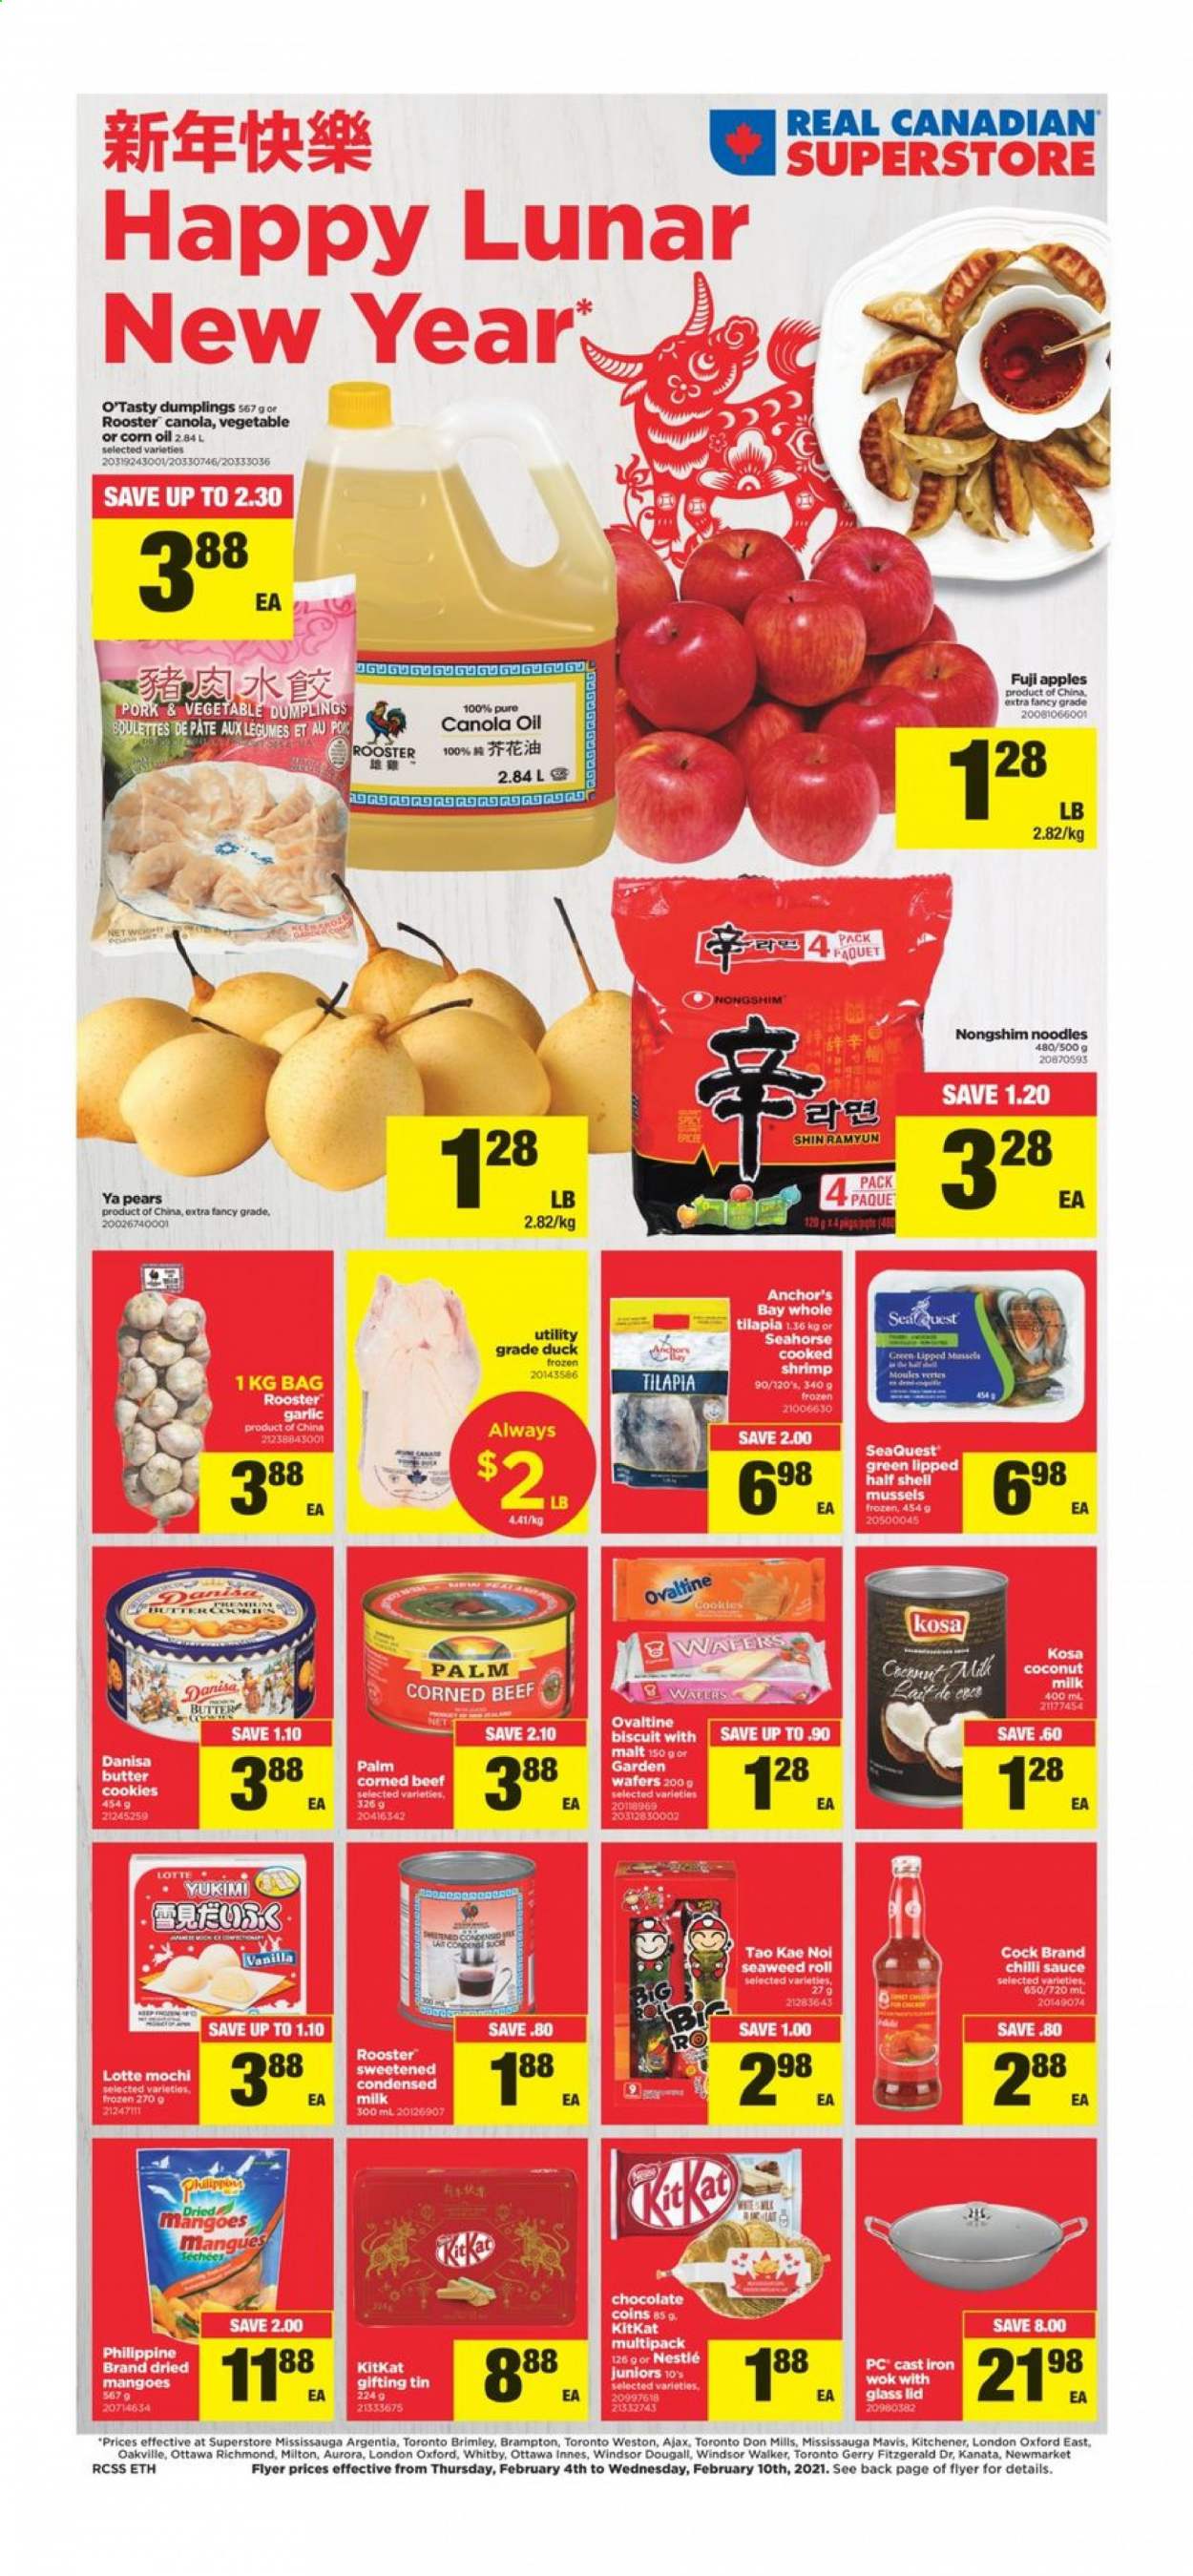 thumbnail - Real Canadian Superstore Flyer - February 04, 2021 - February 10, 2021 - Sales products - garlic, apples, pears, Fuji apple, mussels, tilapia, shrimps, sauce, dumplings, noodles, corned beef, condensed milk, butter, Anchor, cookies, wafers, chocolate, KitKat, biscuit, seaweed, malt, coconut milk, chilli sauce, canola oil, corn oil, beef meat, Ajax, BIC, lid, wok, Nestlé. Page 1.